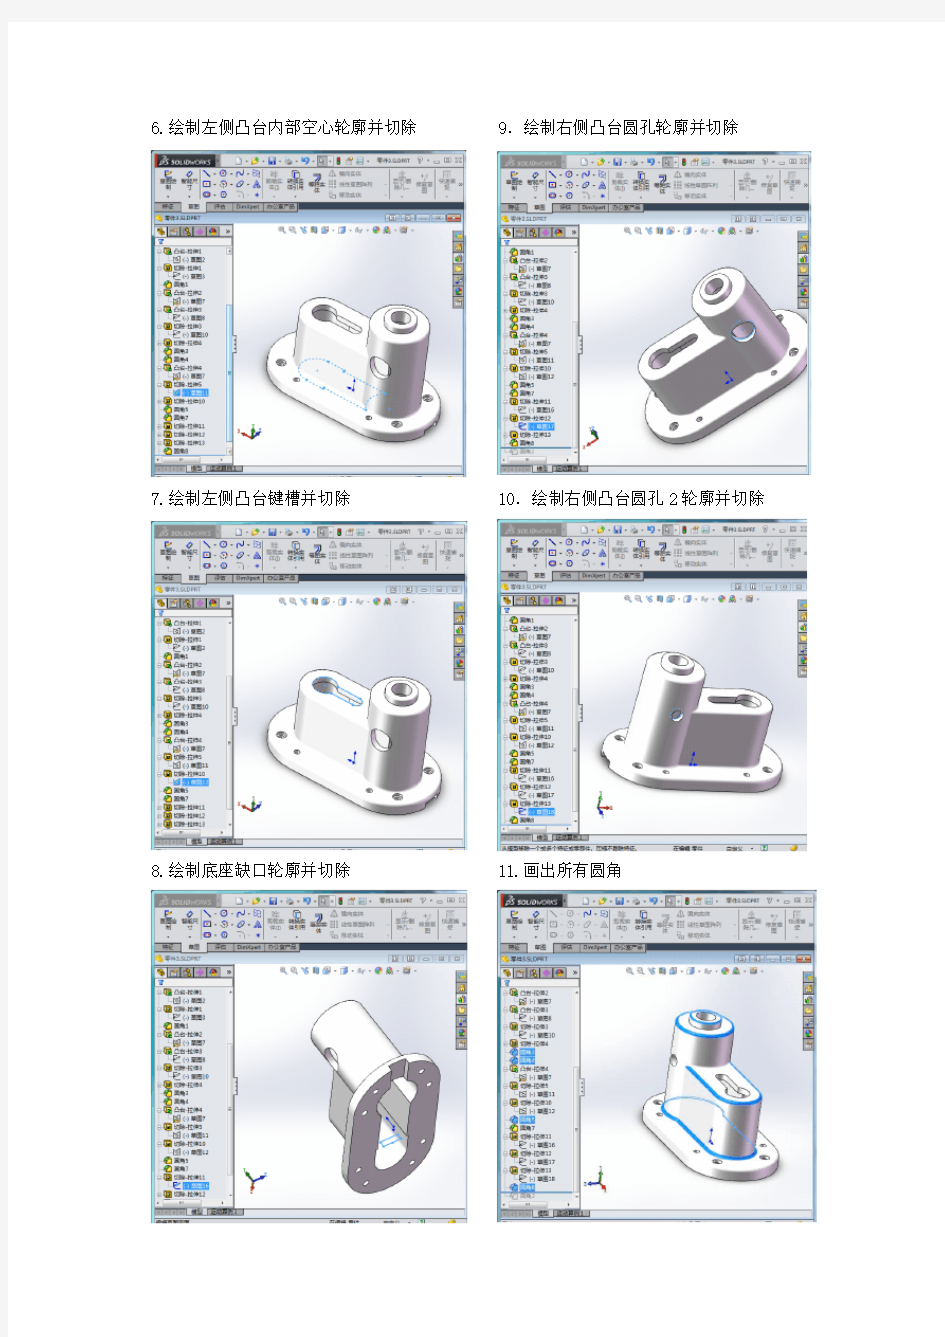 solidworks零件作图思路